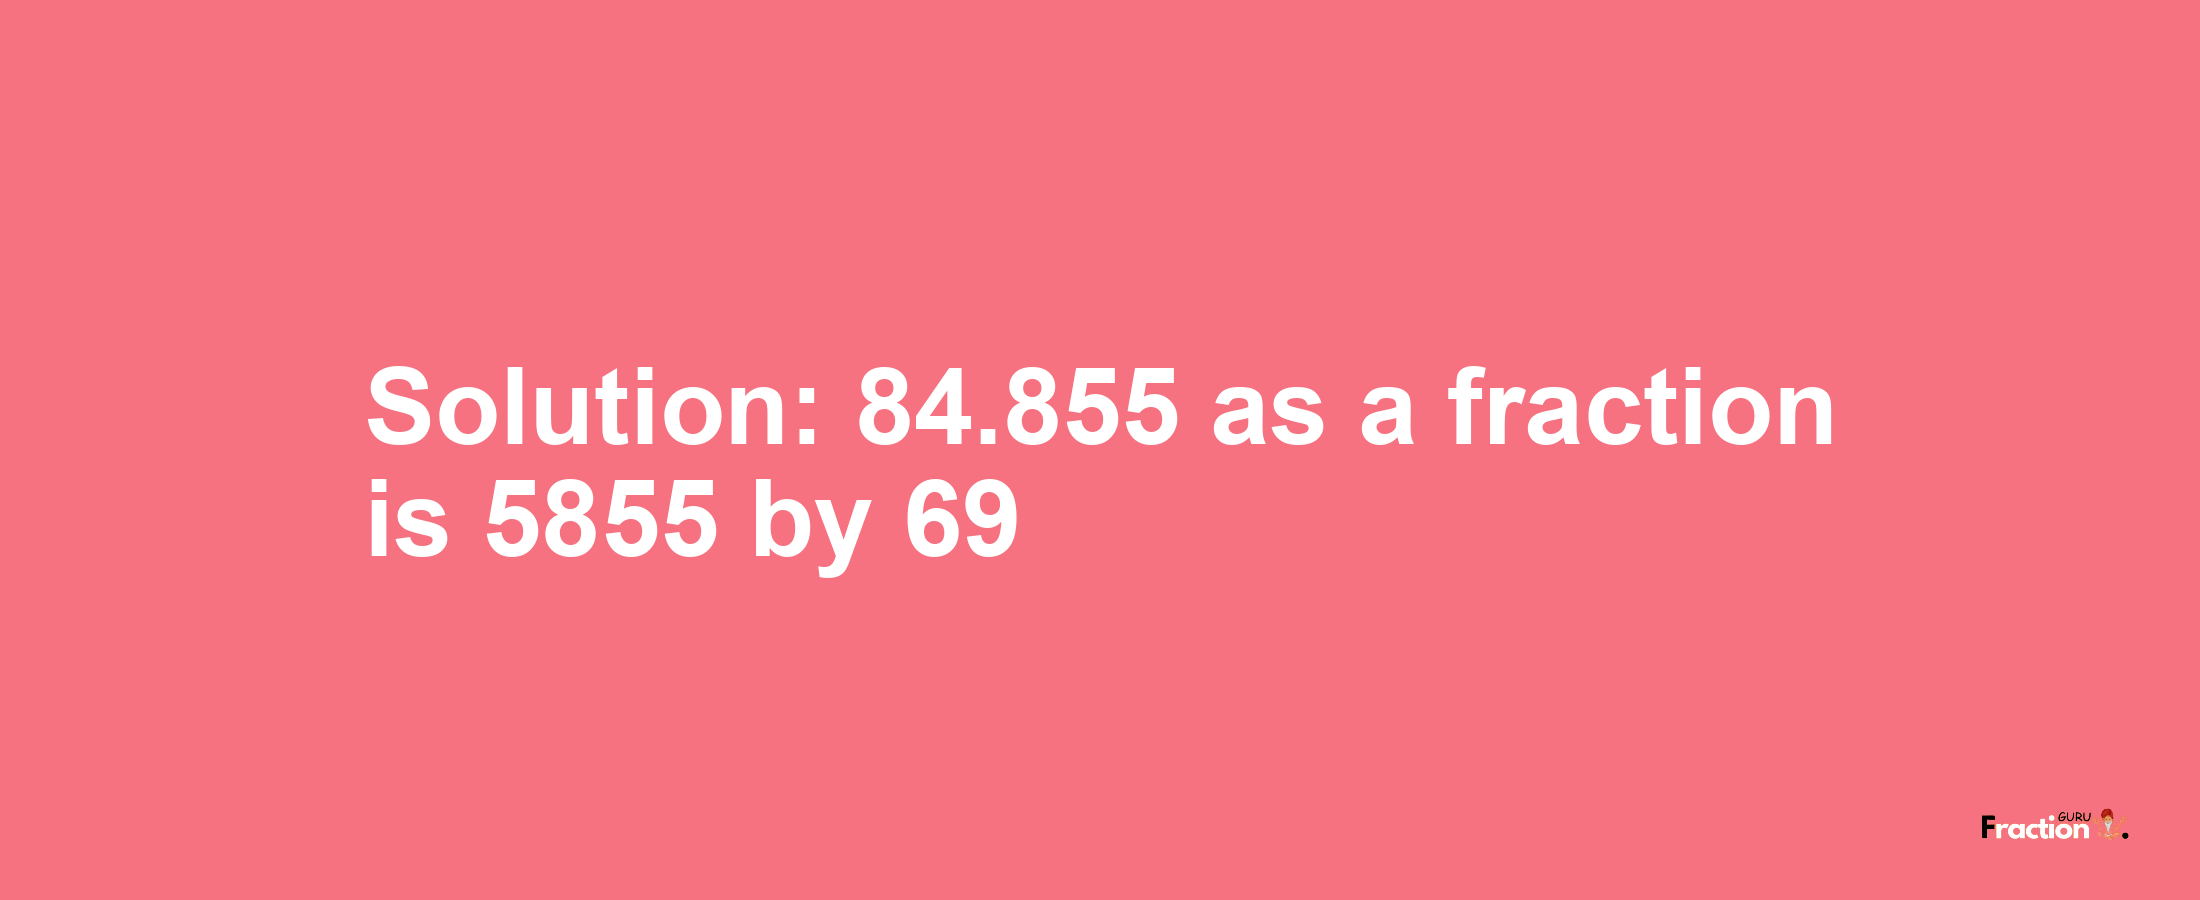 Solution:84.855 as a fraction is 5855/69